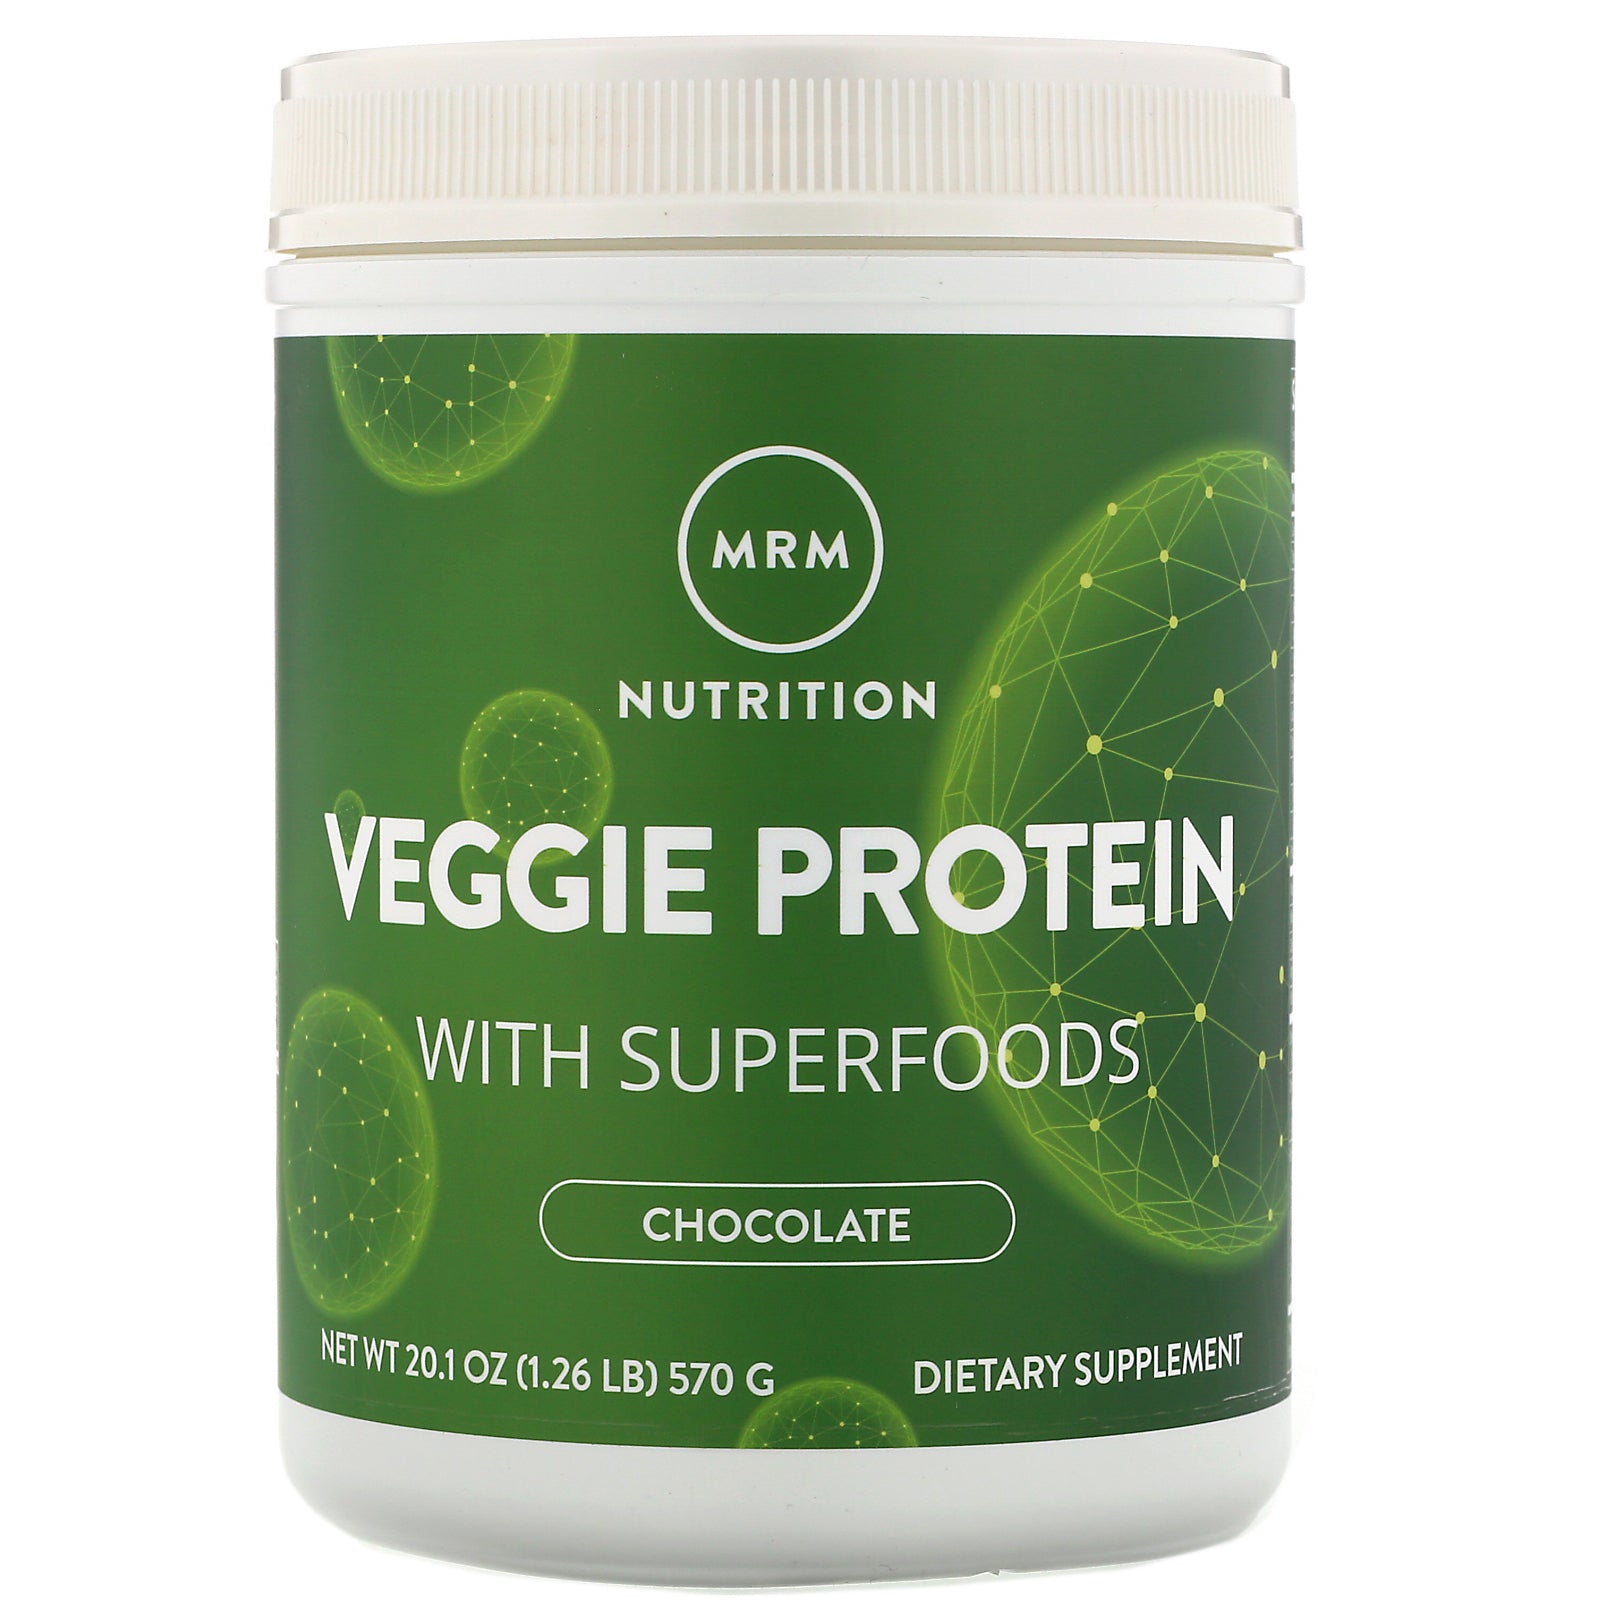 MRM, Nutrition, Veggie Protein with Superfoods, Chocolate, 20.1 oz (570 g)